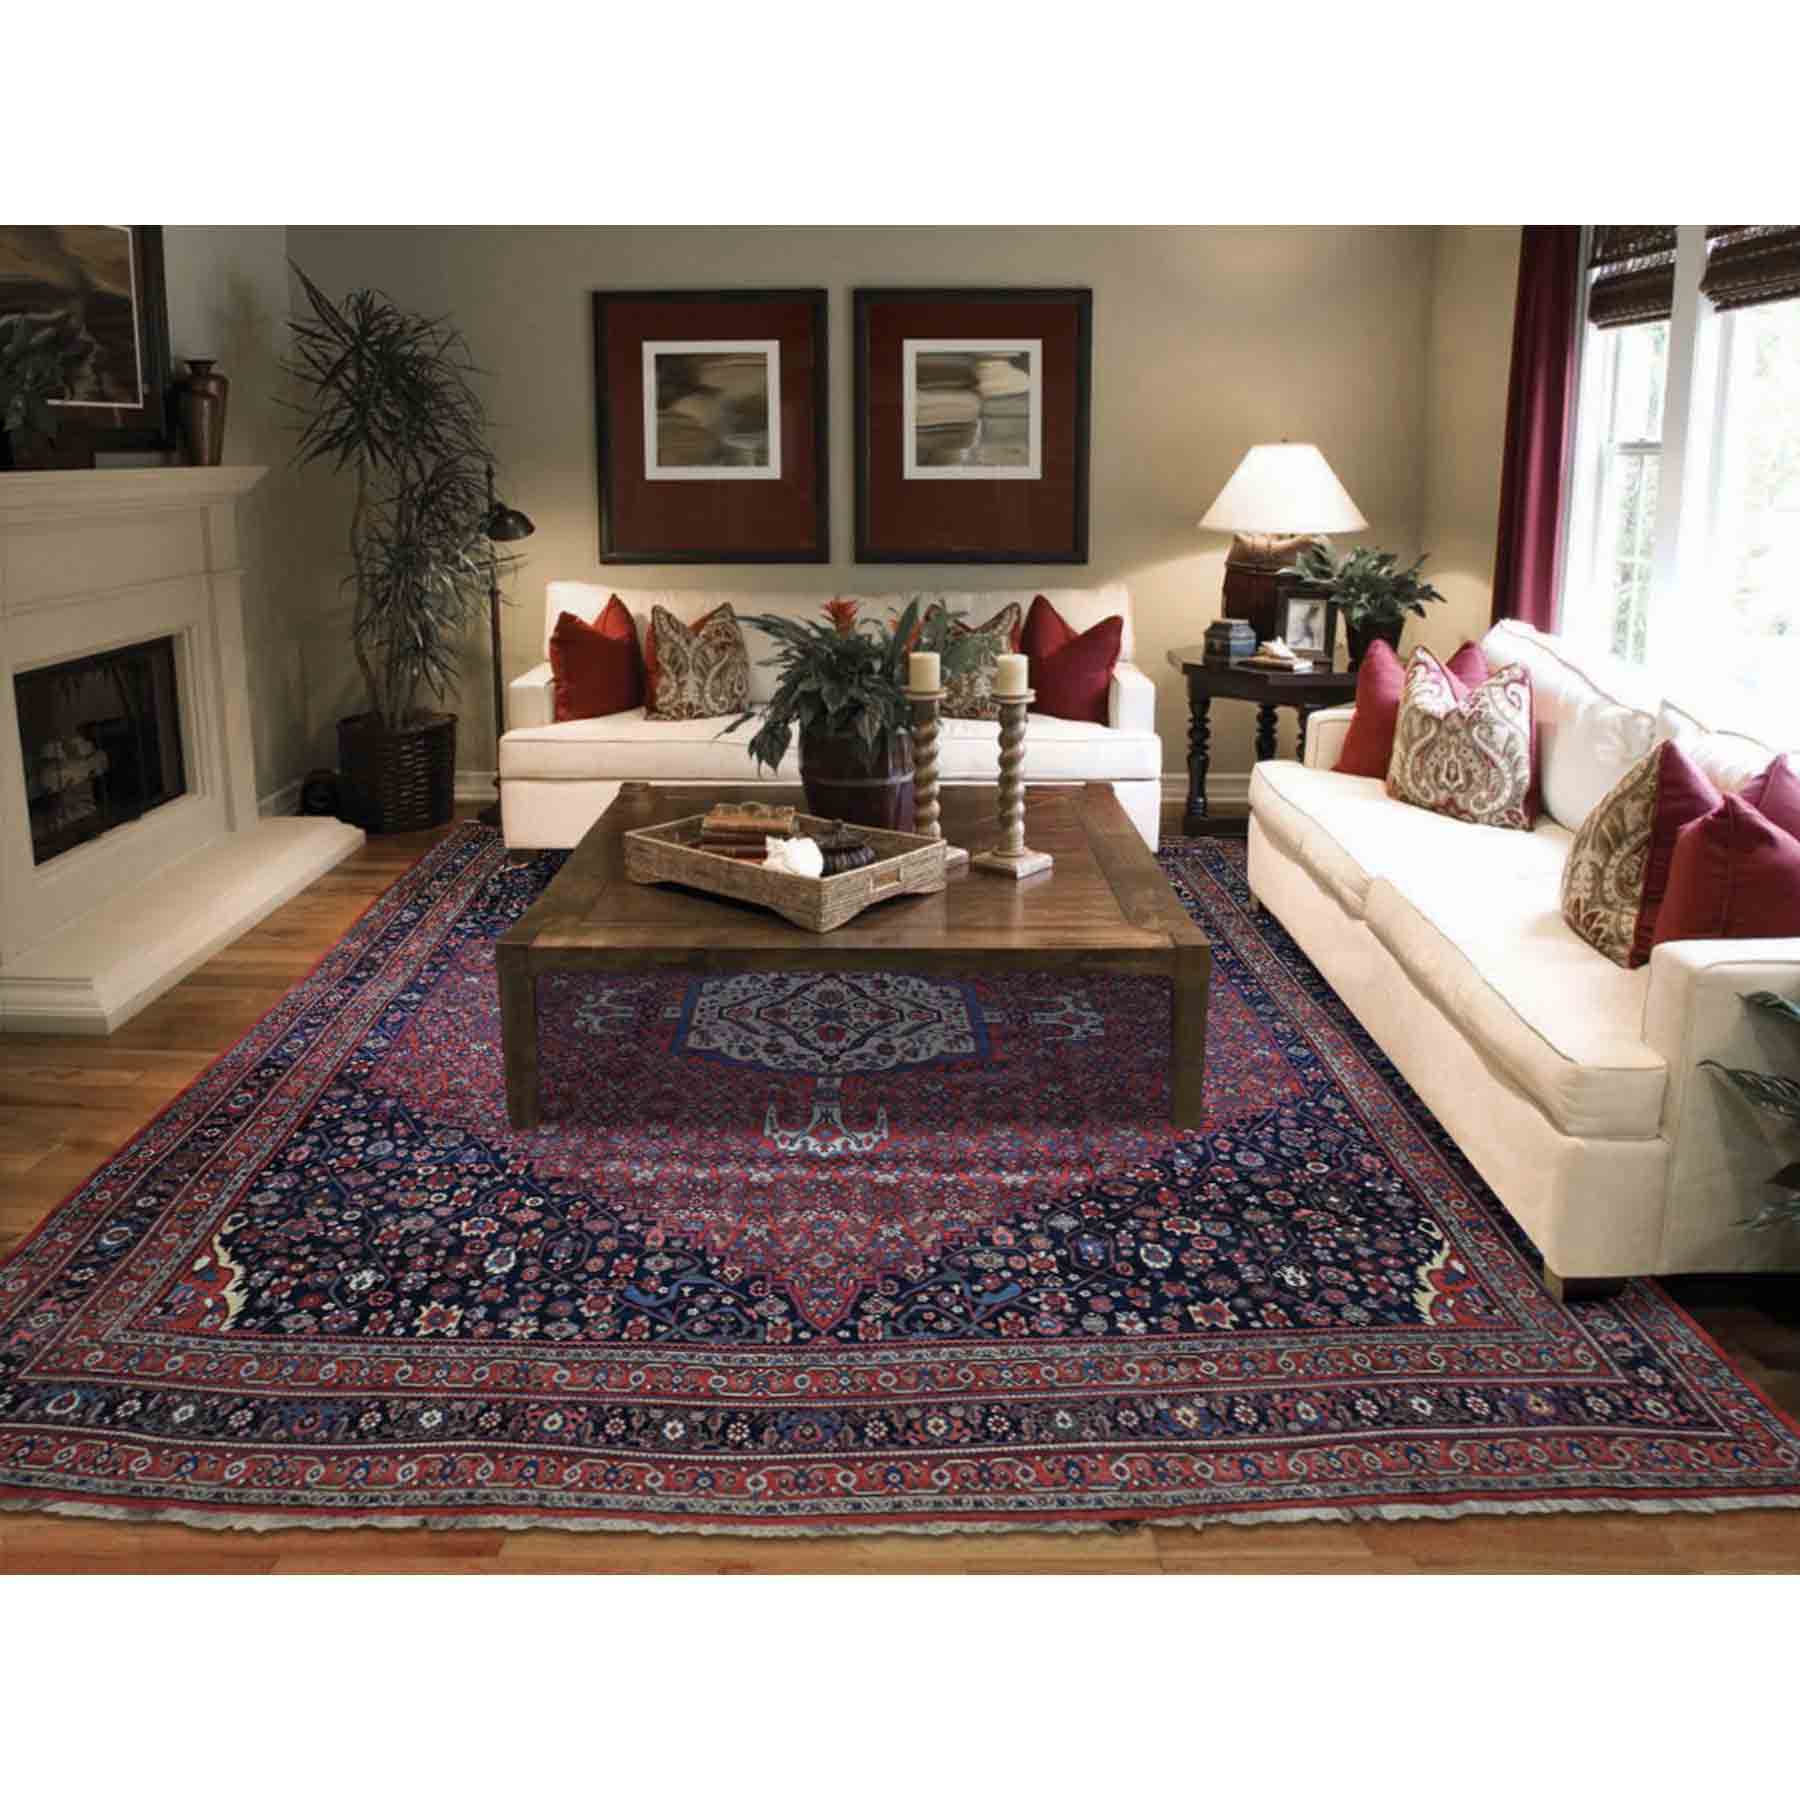 Antique-Hand-Knotted-Rug-224380